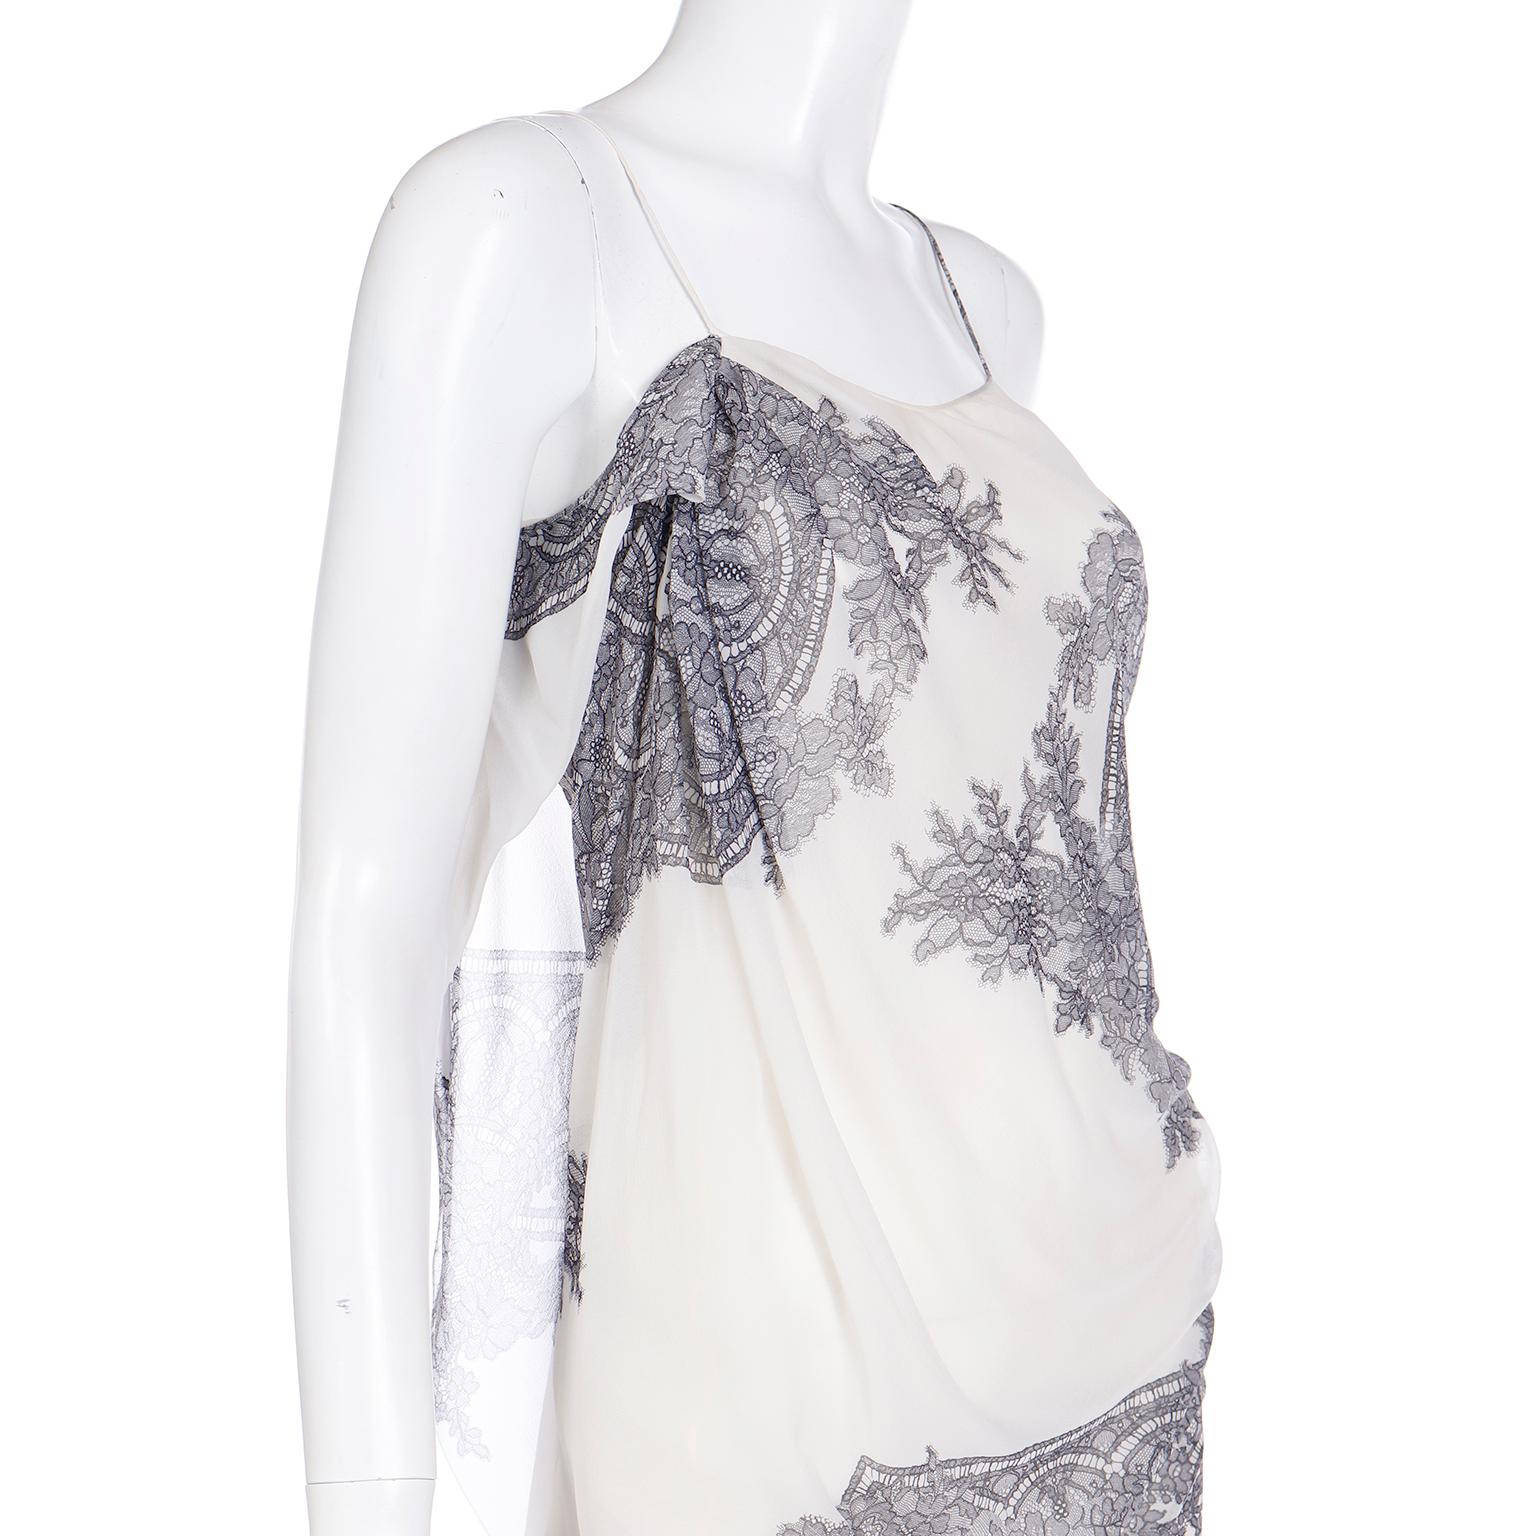 Jean Paul Gaultier 2007 Deadstock Lace Print Slip Dress with Original Tags For Sale 4